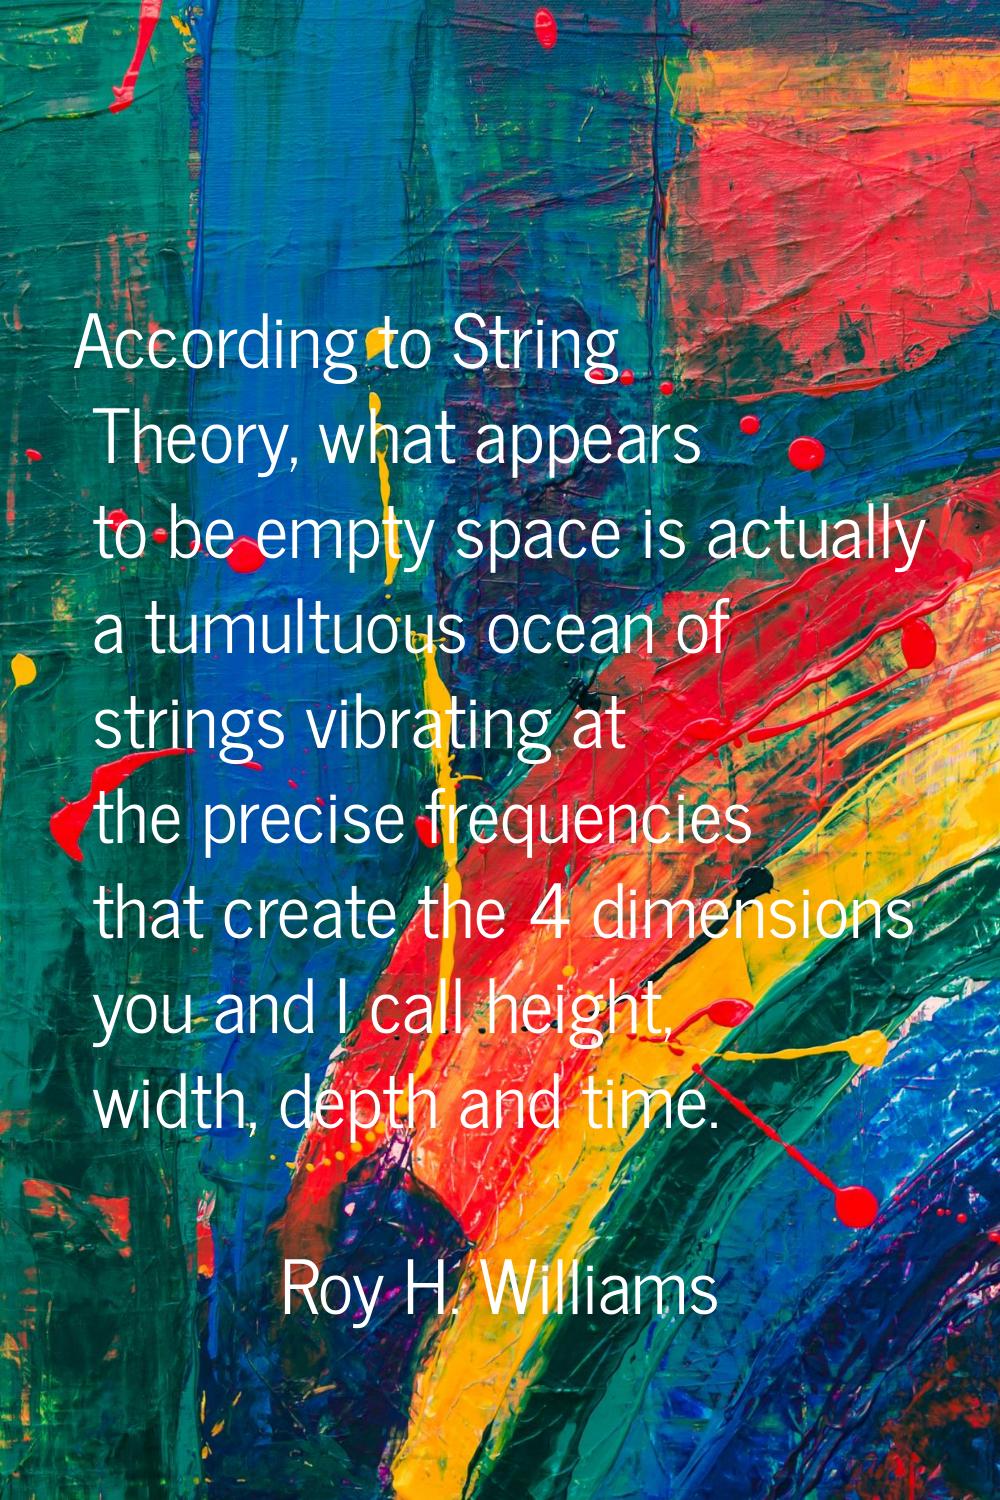 According to String Theory, what appears to be empty space is actually a tumultuous ocean of string